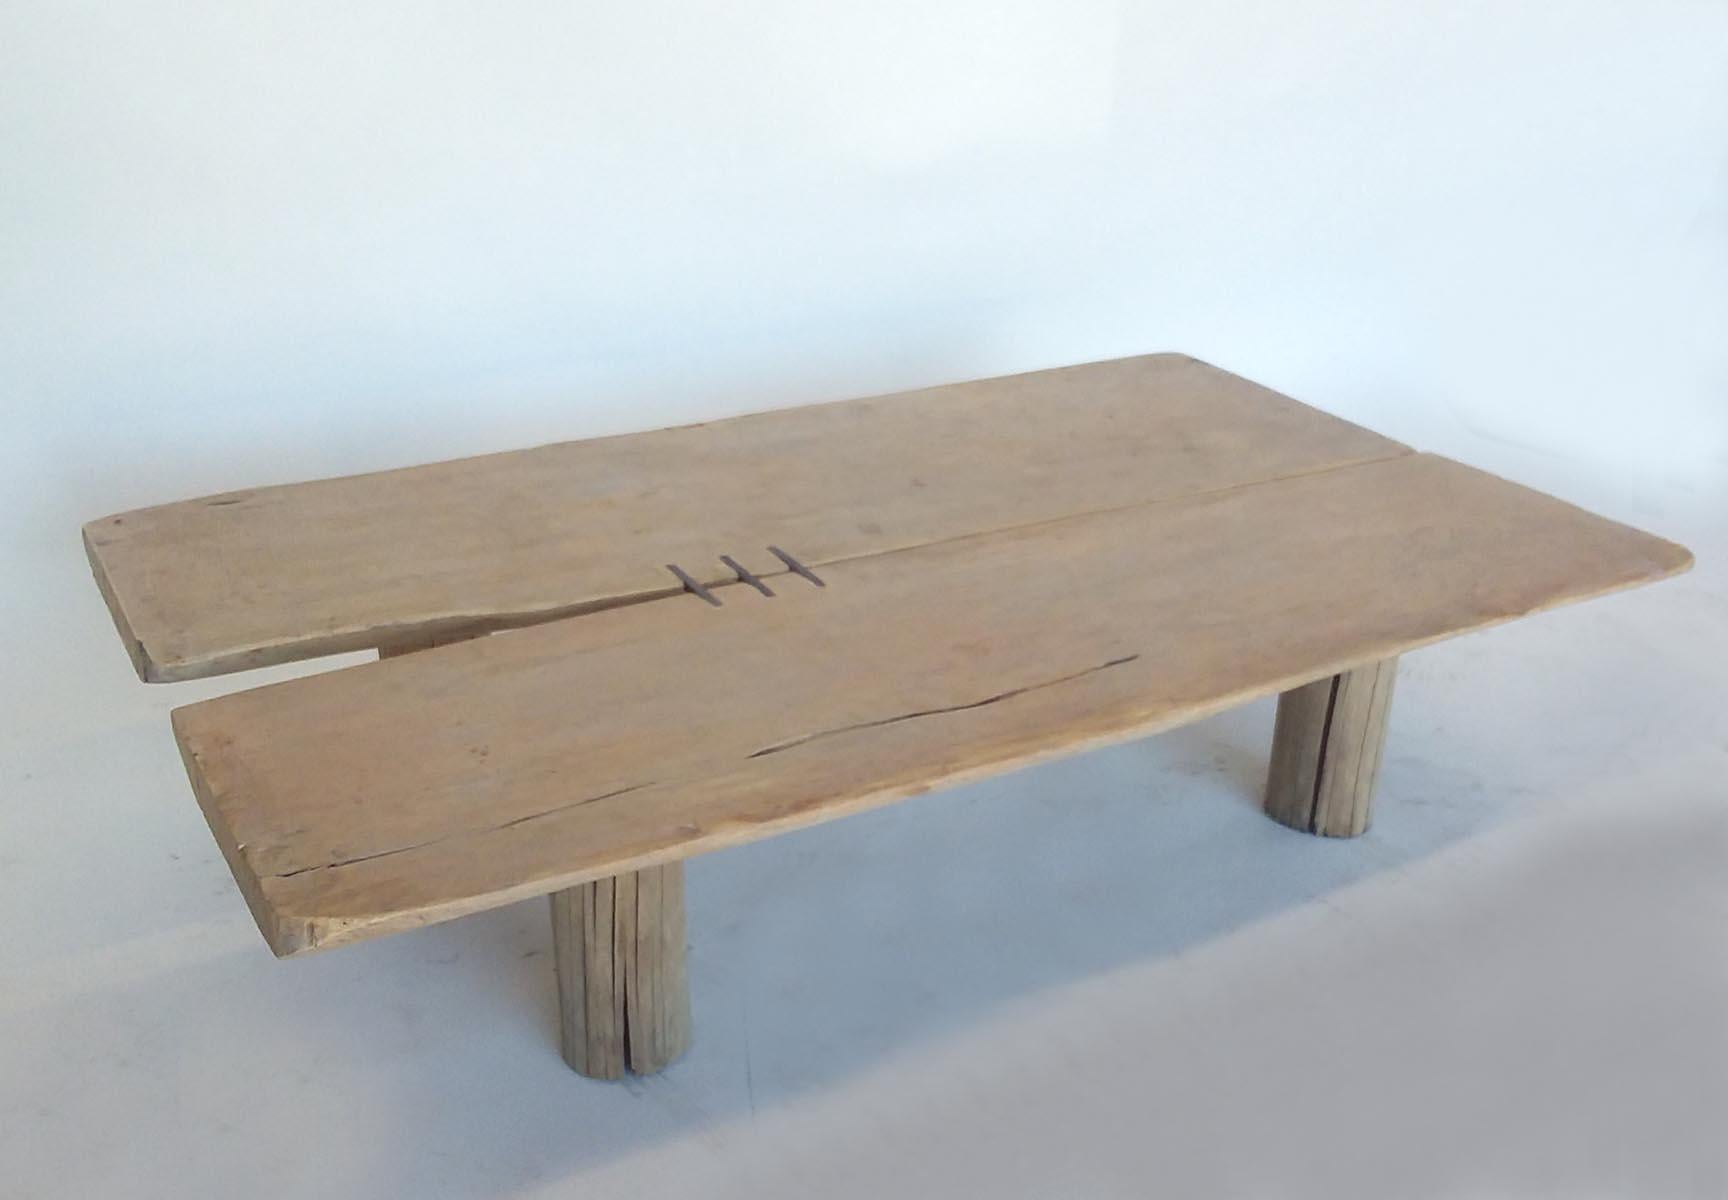 Rustic, yet modern, simple and elegant low coffee table consisting of two organic shaped boards connected to make one surface. Three inlaid hand forged pieces of iron. Wood is very smooth, worn and has a light patina. This is a one of a kind piece